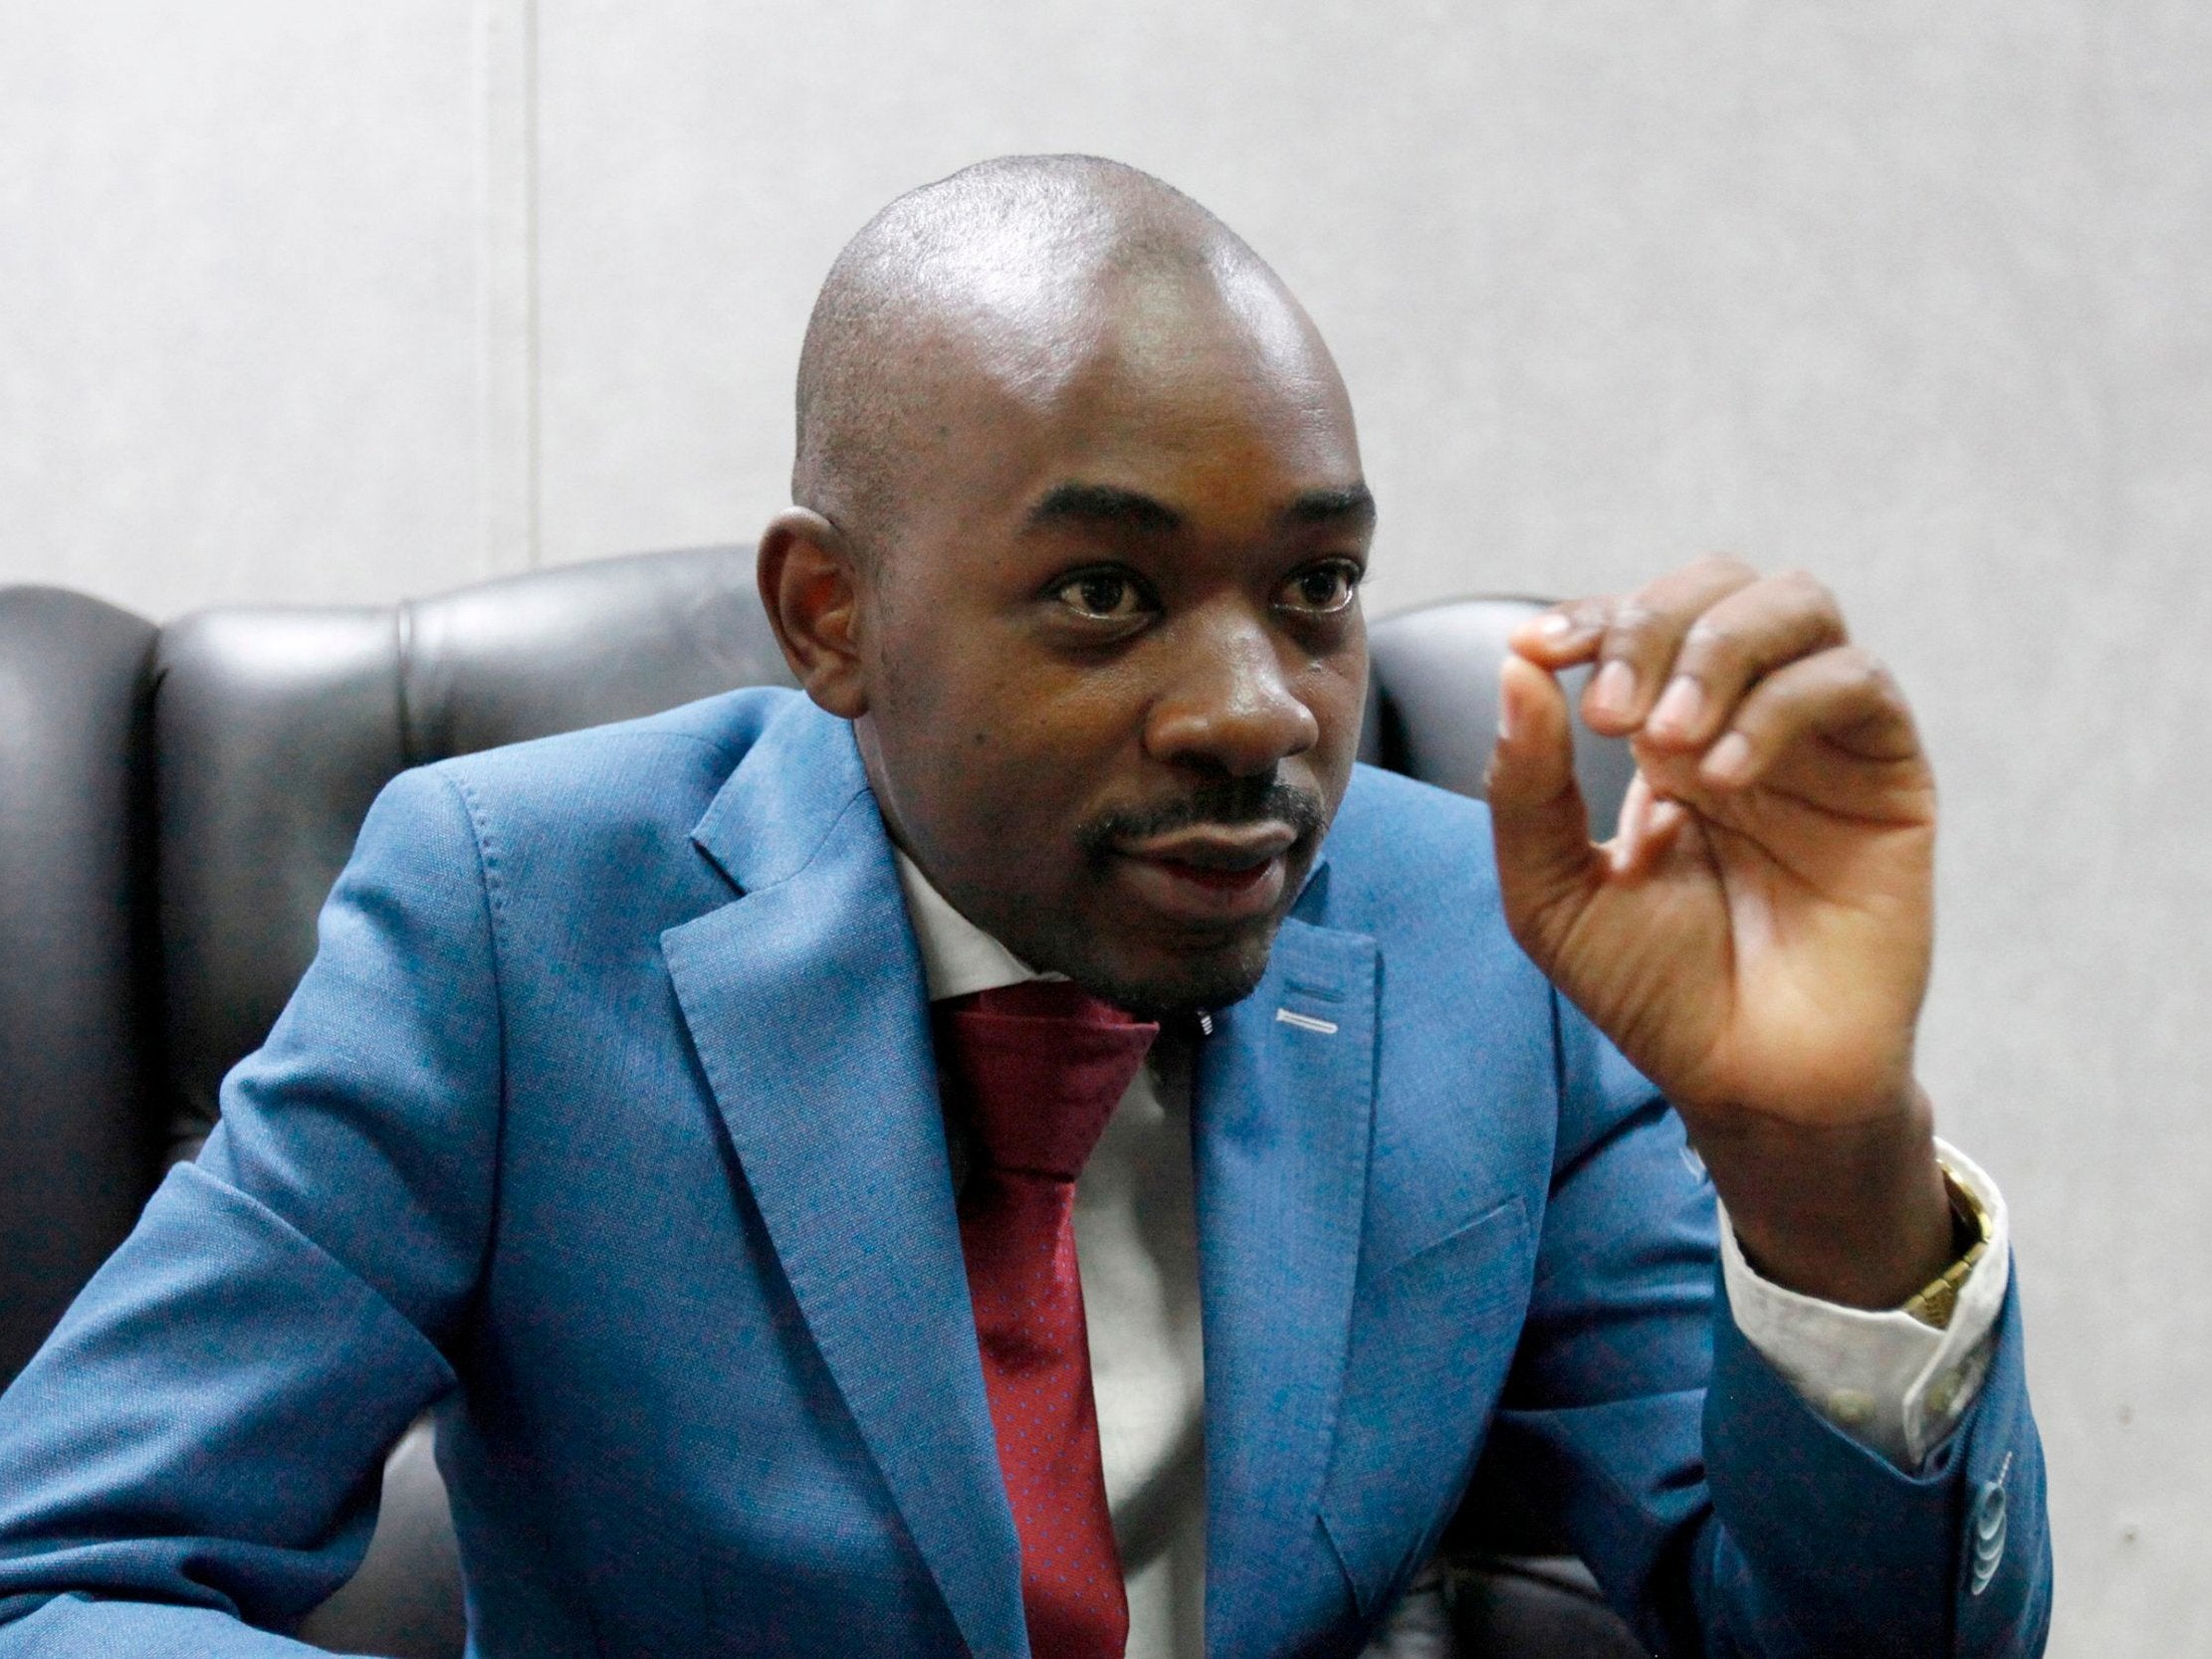 There is a perception among supporters of Nelson Chamisa (above) that Britain is backing Emmerson Mnangagwa to gain political advantage in the country